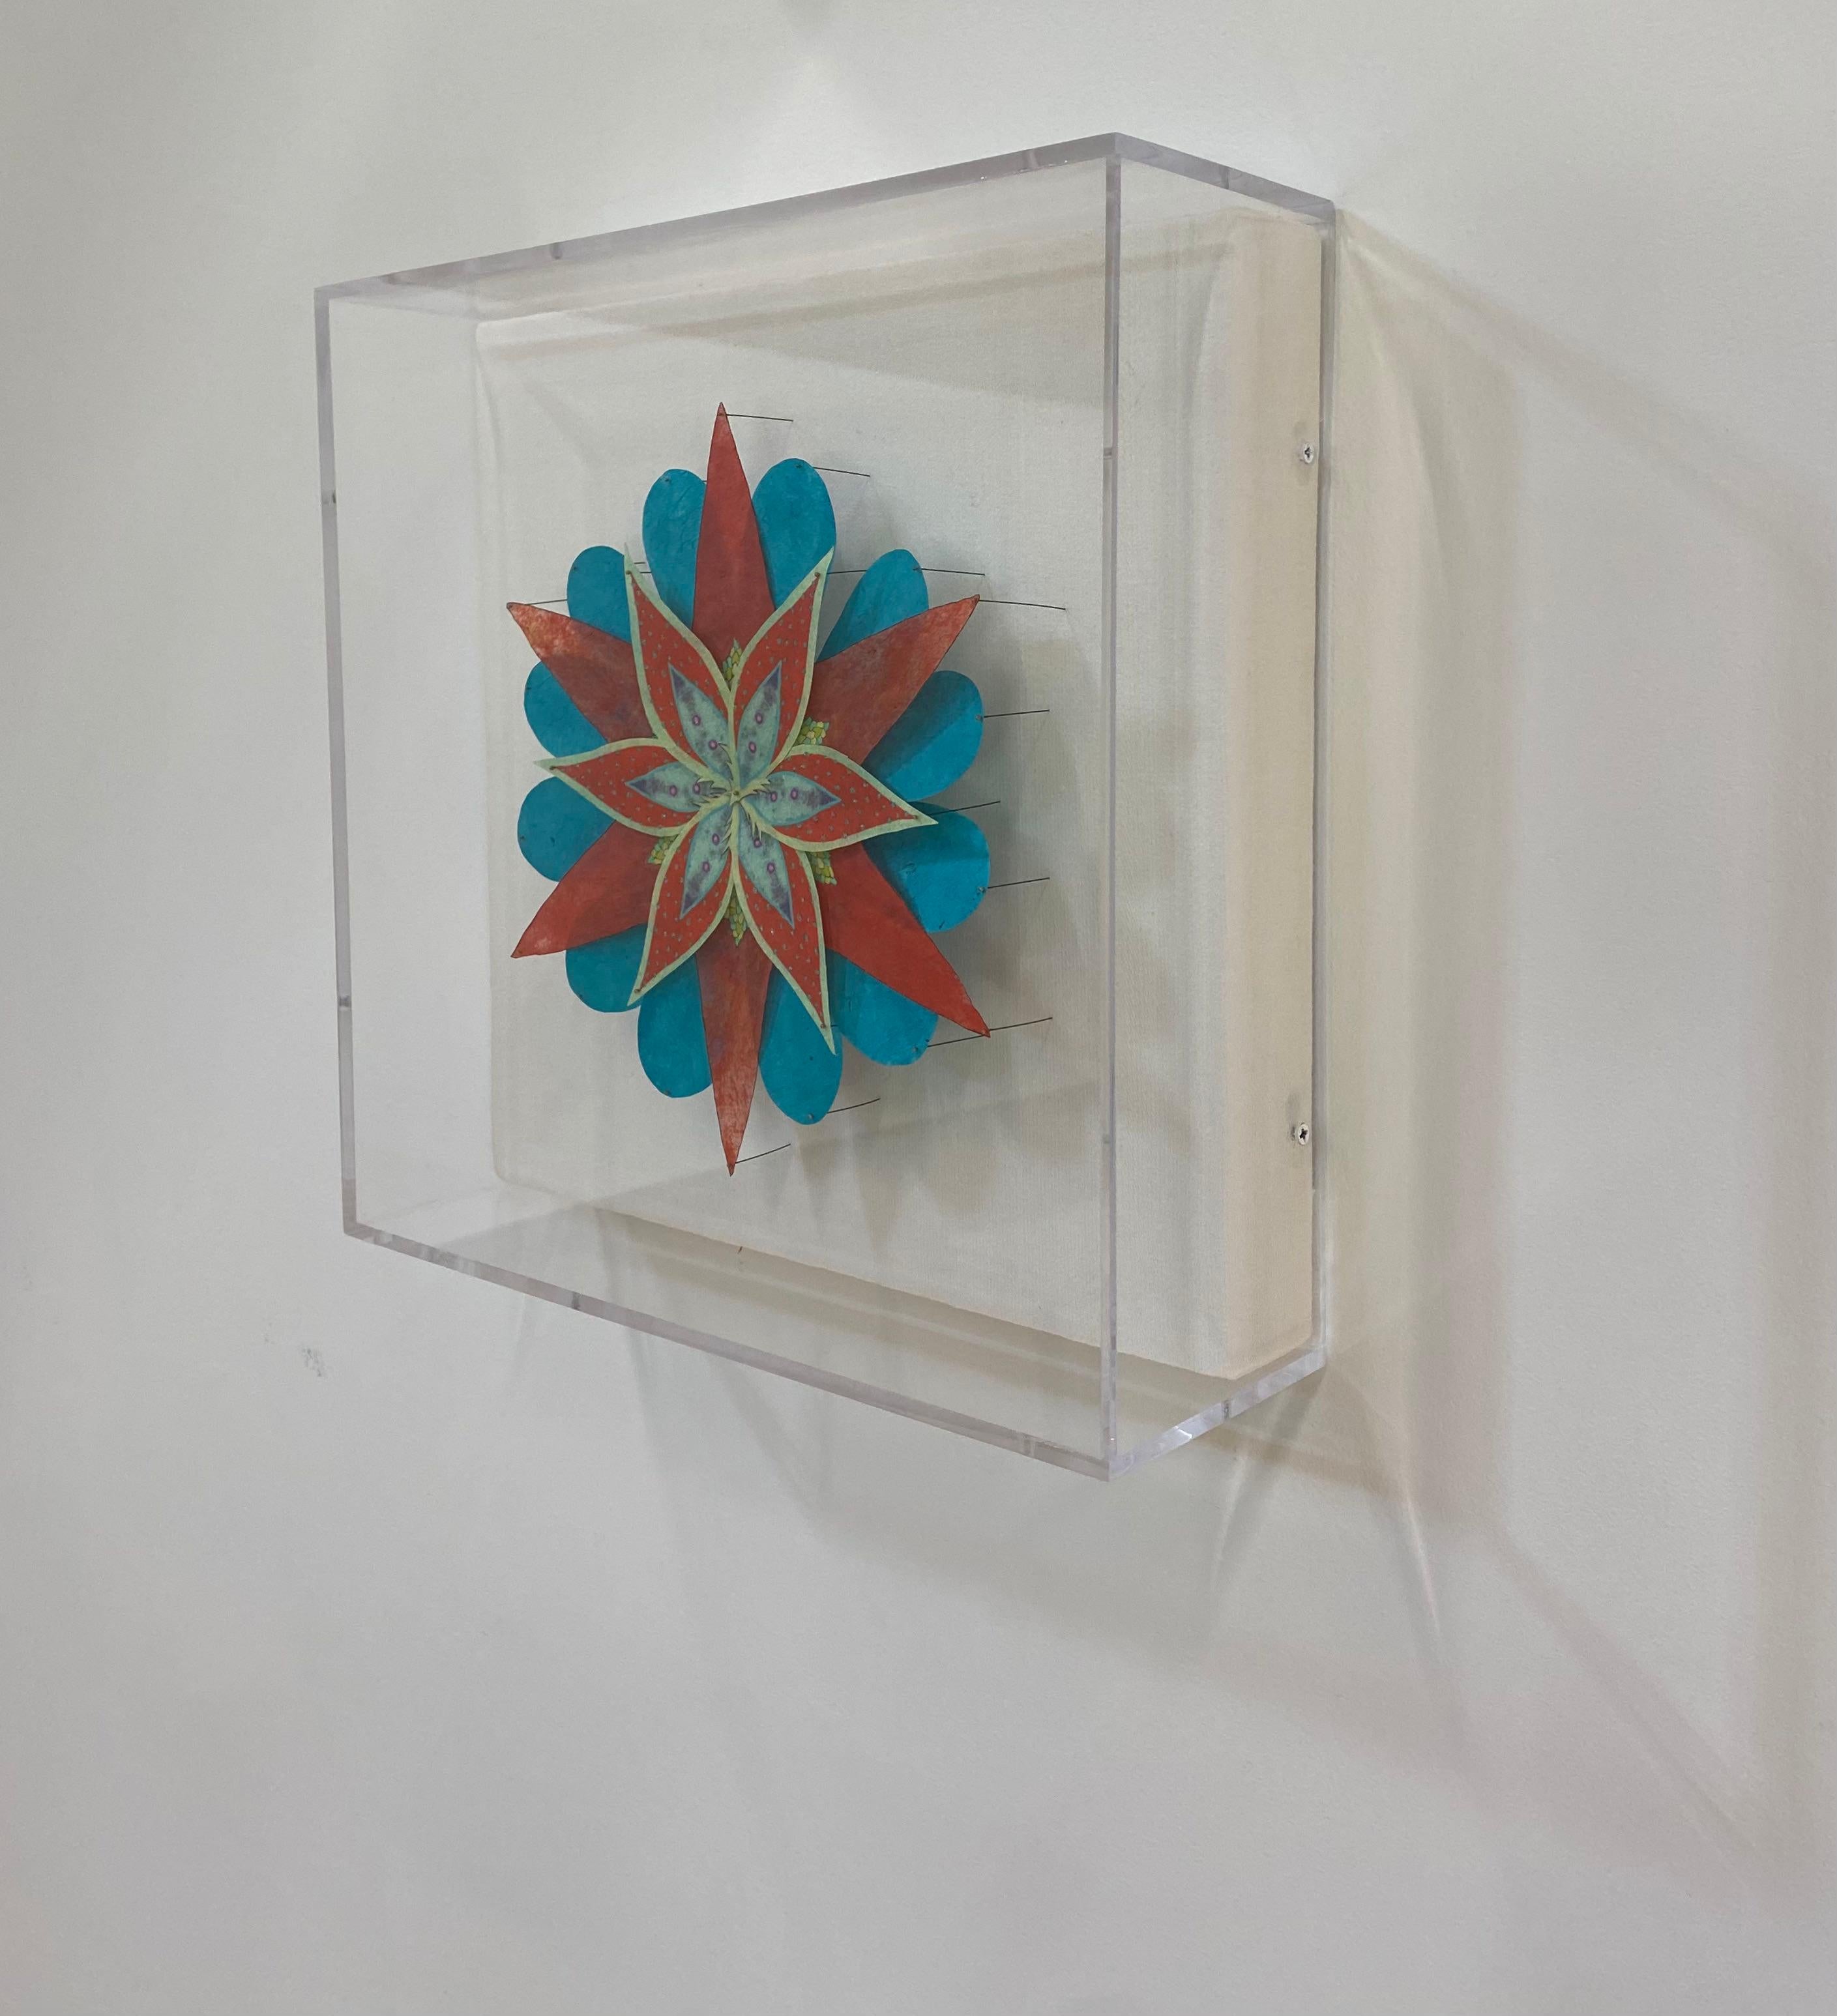 A bright and colorful paper sculpture of a fantastical botanical form in vibrant teal blue, reddish orange and light lime green and yellow. Composed of hand-colored etchings on hand-cut, handmade Loktah paper, hand-colored digital prints on hand-cut